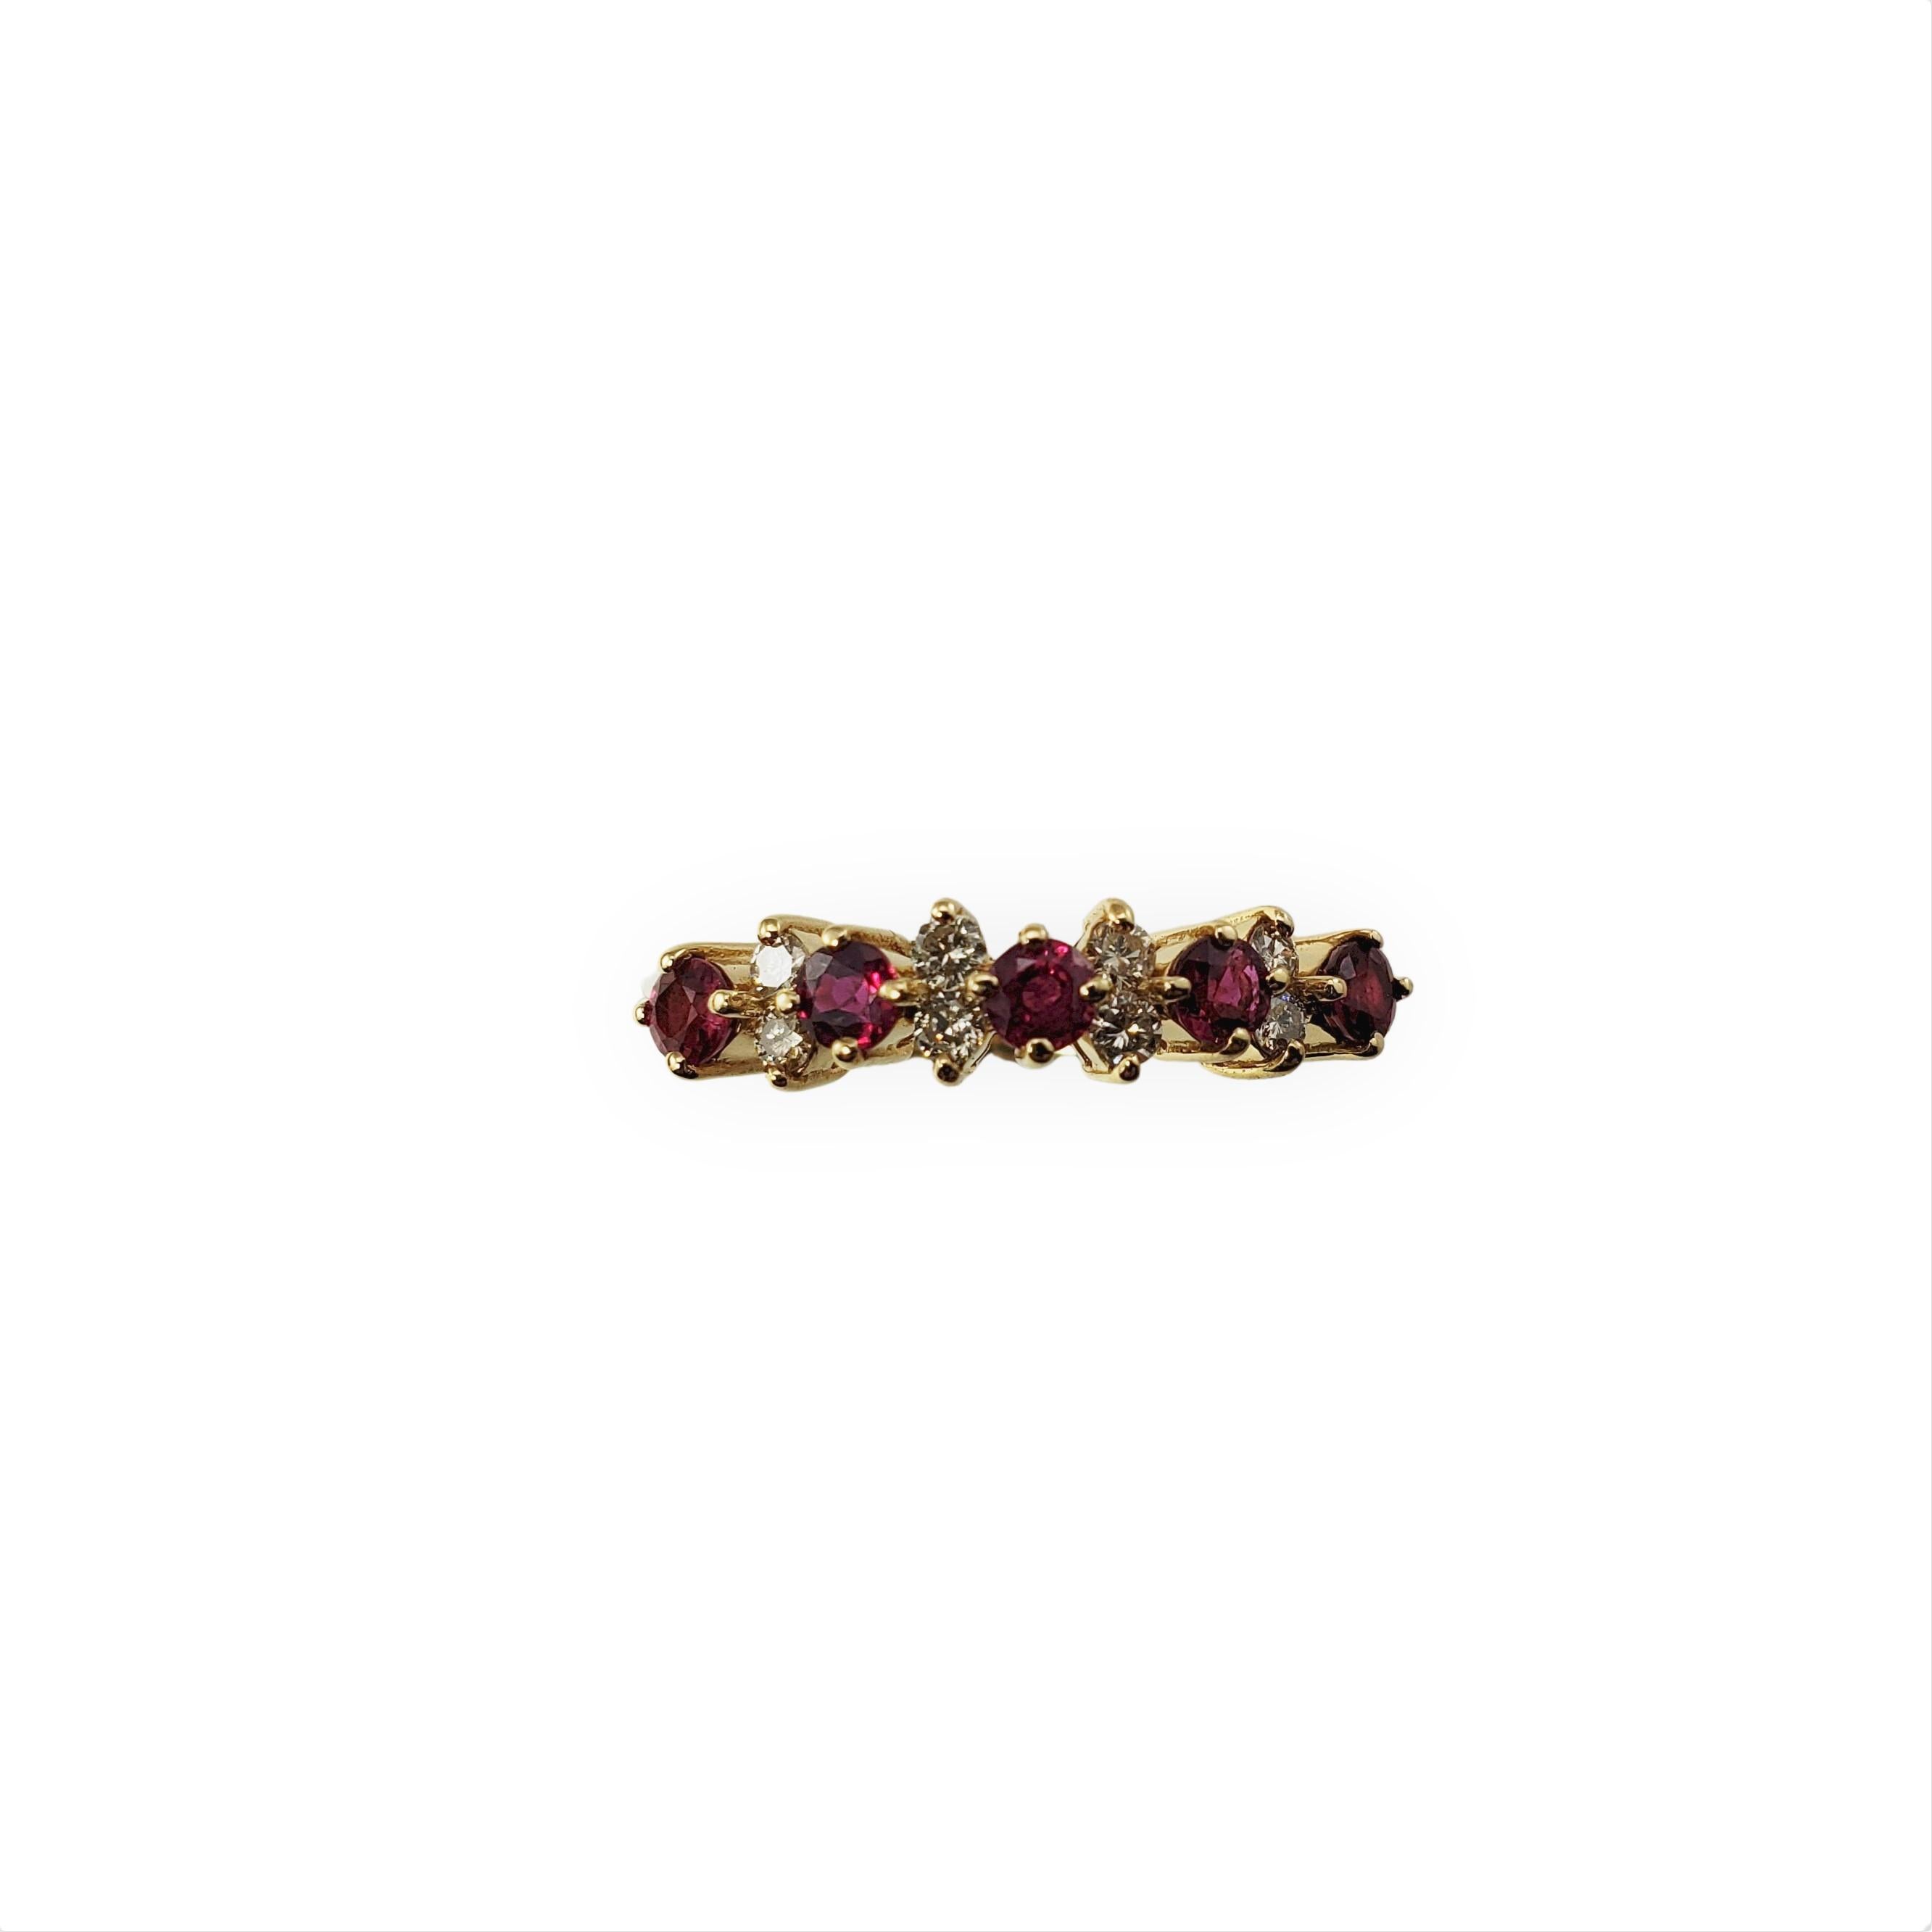 Vintage 14 Karat Yellow Gold Ruby and Diamond Ring Size 7-

This lovely ring features five round rubies and eight round brilliant cut diamond set in classic 14K yellow gold. Width: 5 mm.
Shank: 1.5 mm.

Approximate total diamond weight: .16